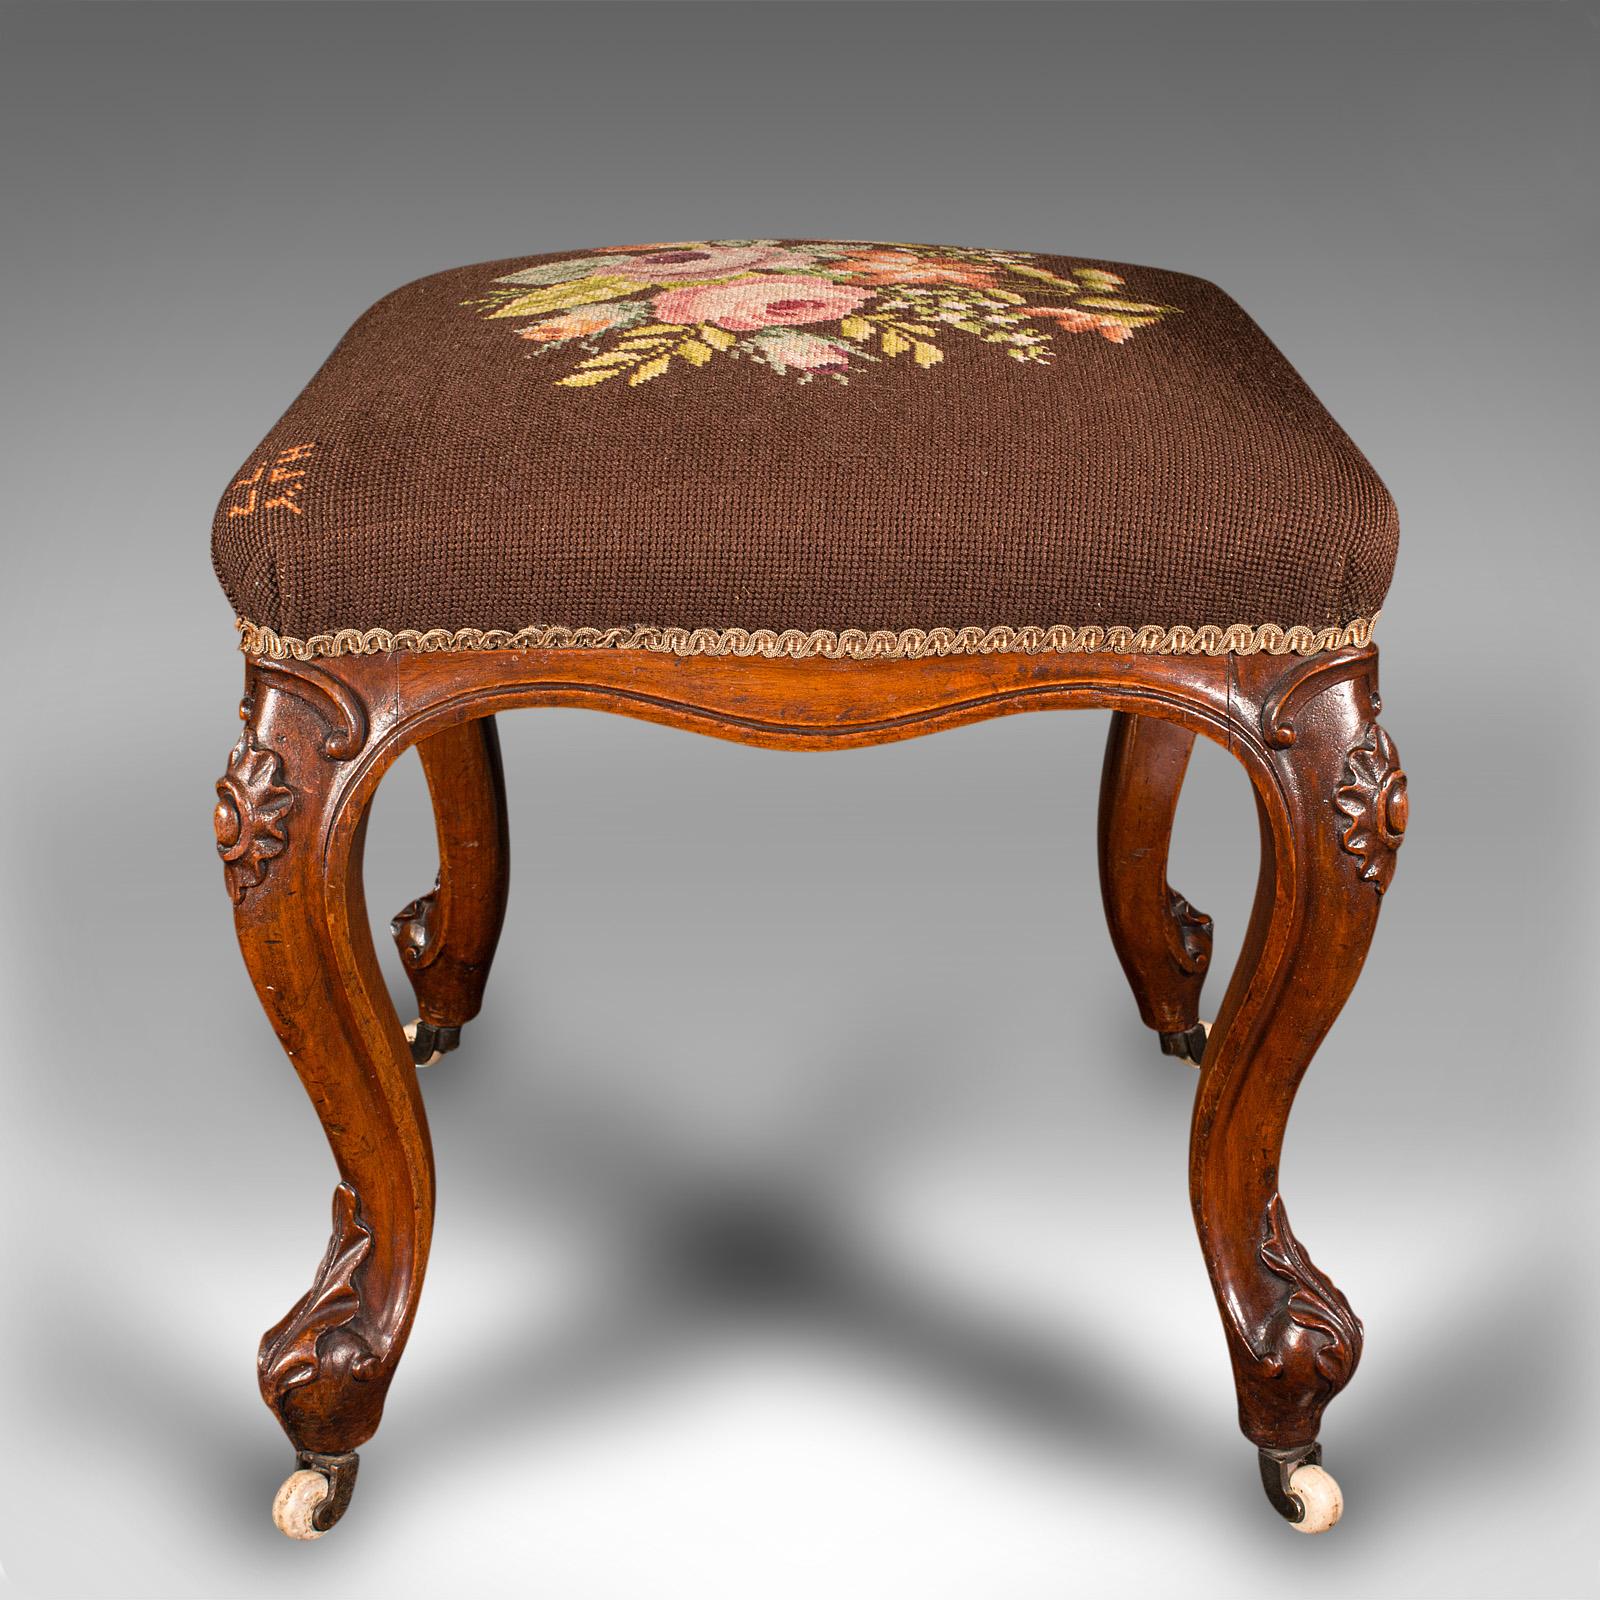 Antique Dressing Stool, English, Walnut, Needlepoint, Footstool, Early Victorian In Good Condition For Sale In Hele, Devon, GB